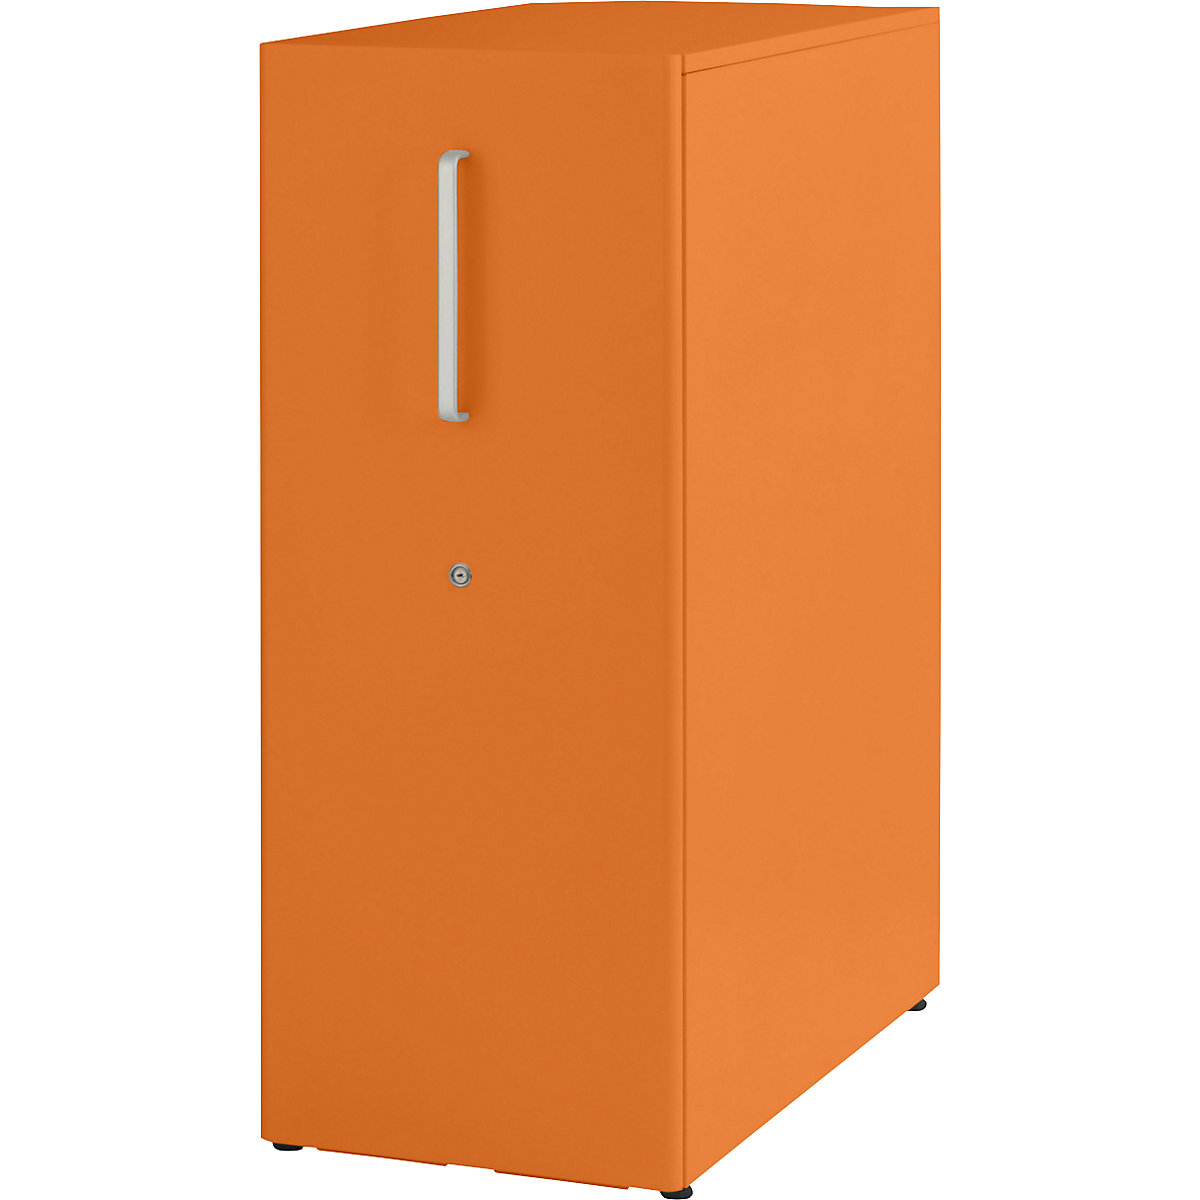 Tower™ 3 add-on furniture, with worktop – BISLEY, for the right side, 1 shelf, orange-16